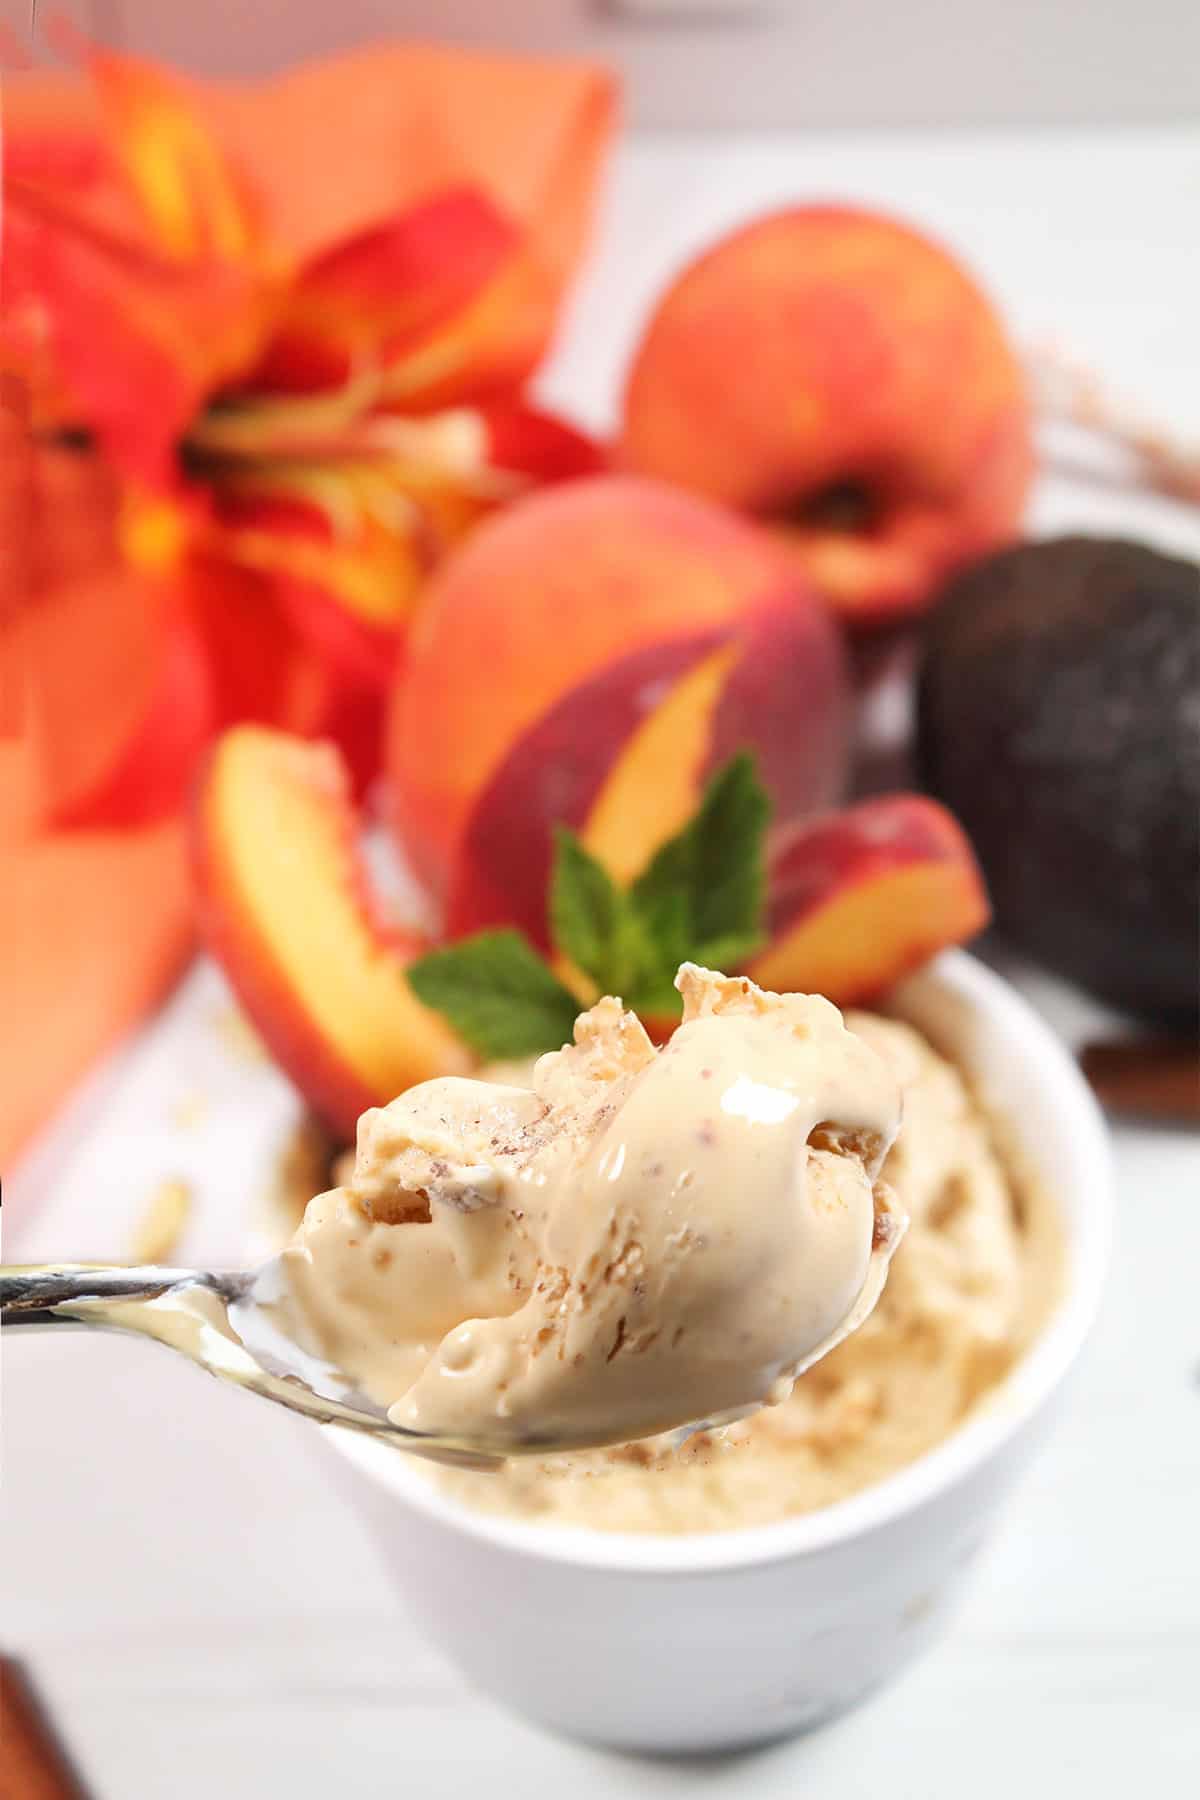 Spoonful of peach ice cream over bowl.